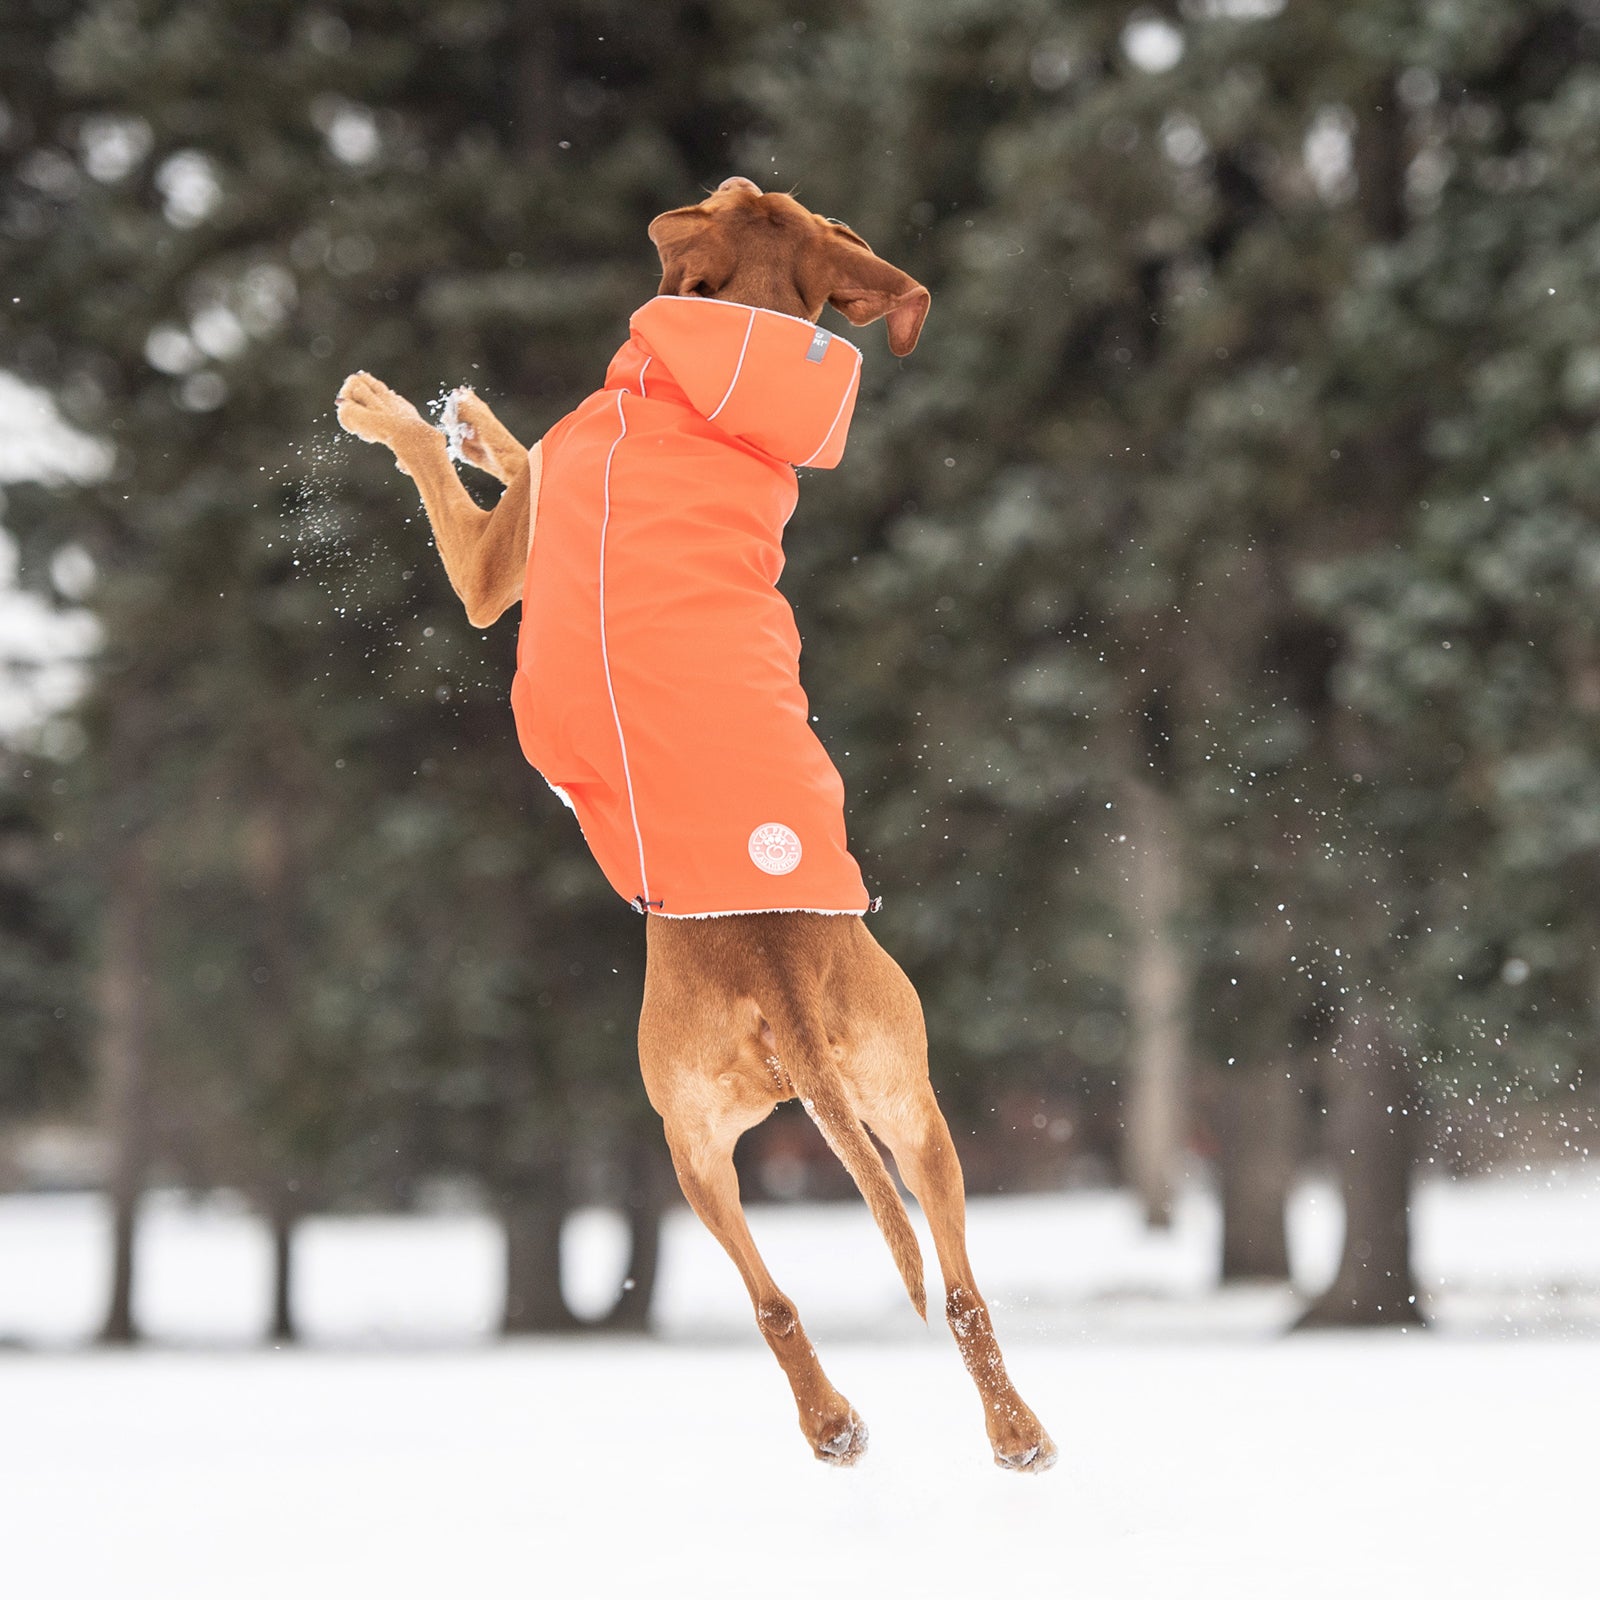 a large red short haired dog jumping in the air outside in the snow wearing an orange hooded raincoat